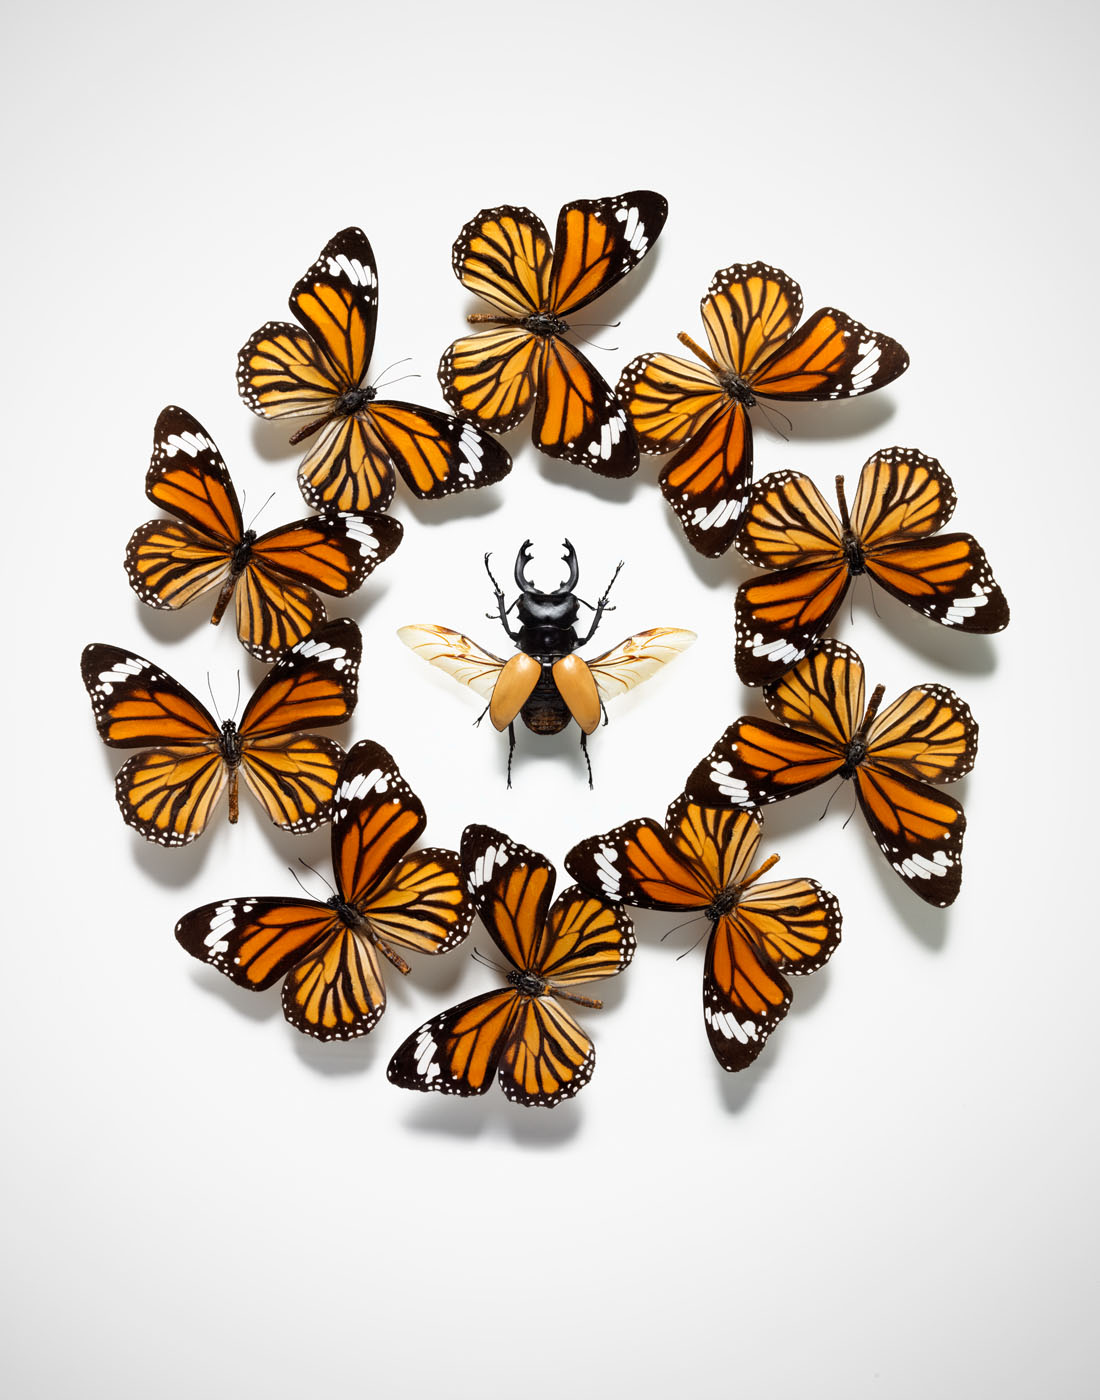 Beautiful butterflies in circle by Alexander Kent London based still life and product photographer.